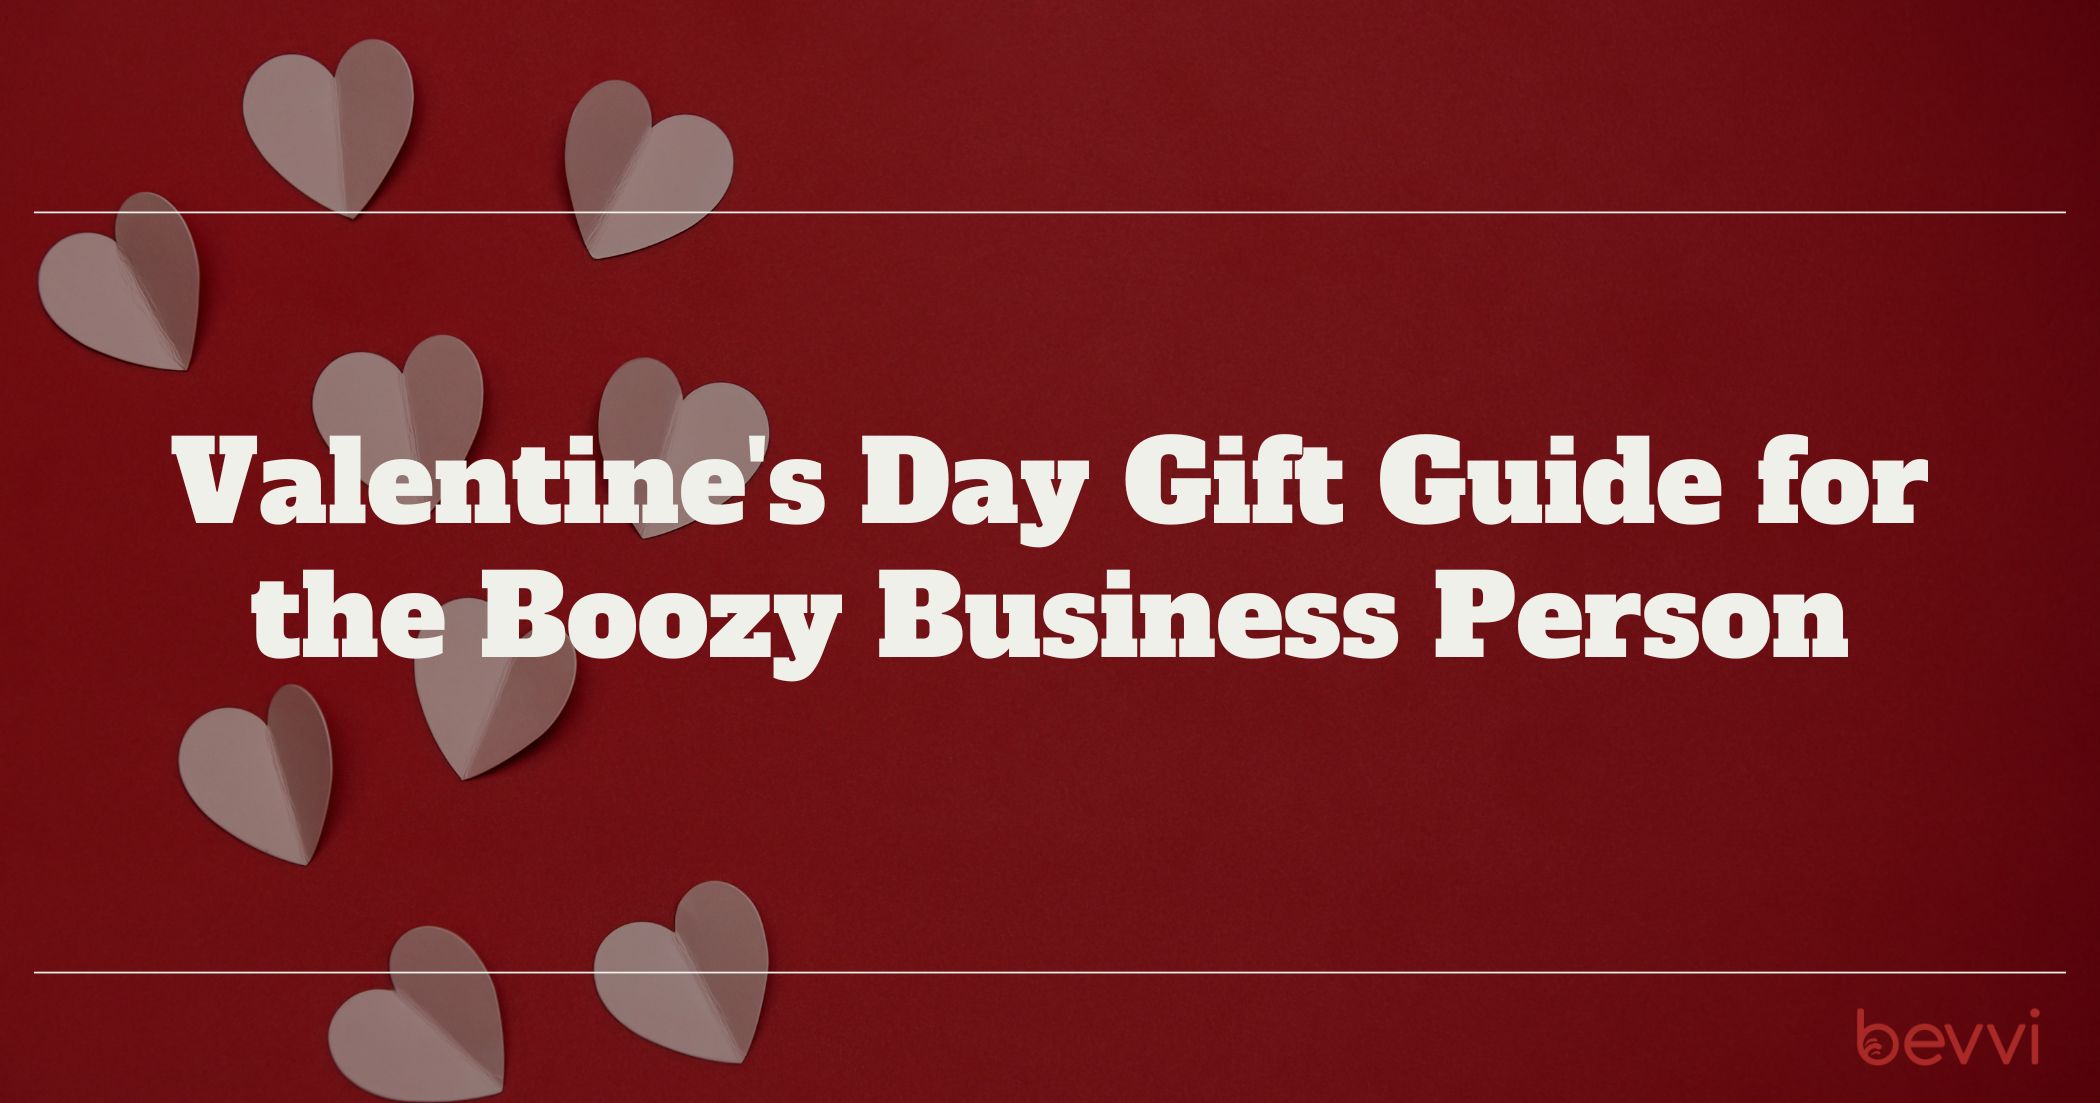 Valentine’s Day Gift Guide for the Boozy Business Person: Wine and Spirit Ideas that Wow